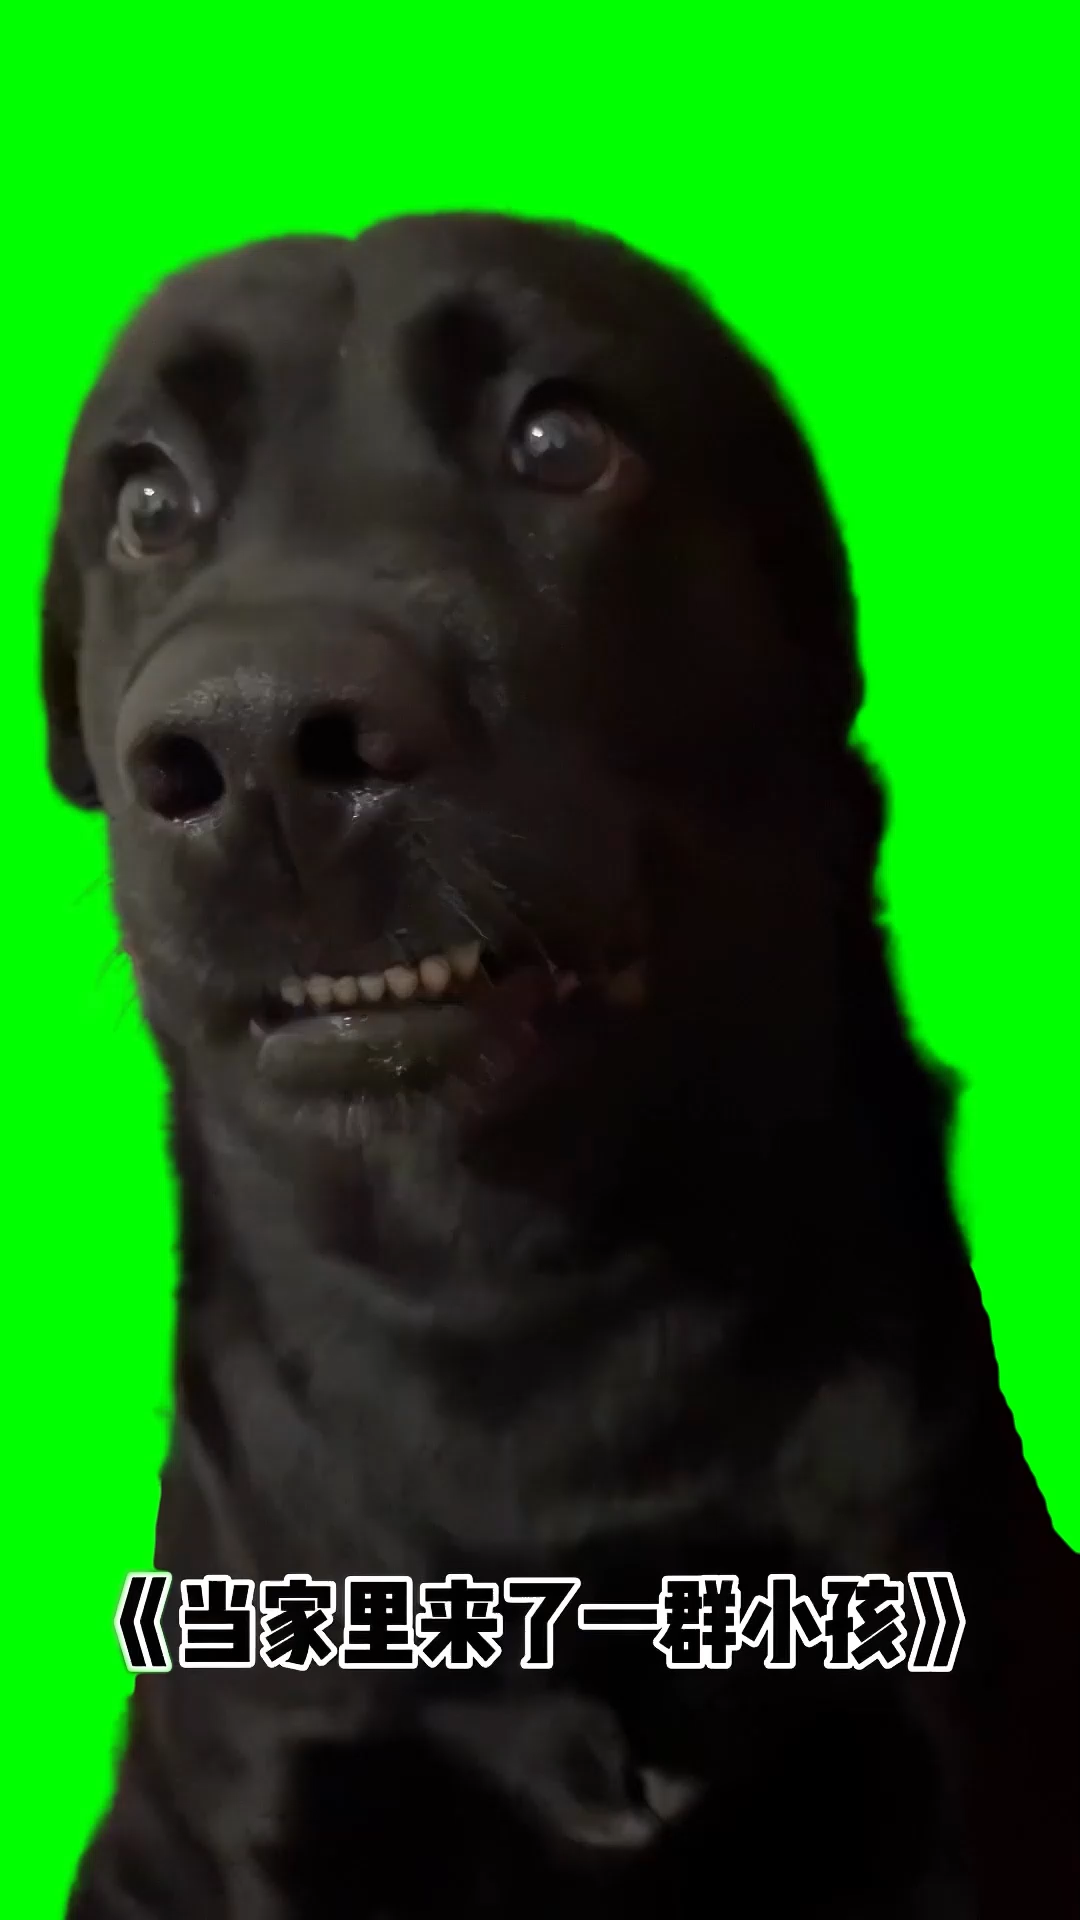 Confused Black Dog Grinning (Green Screen)